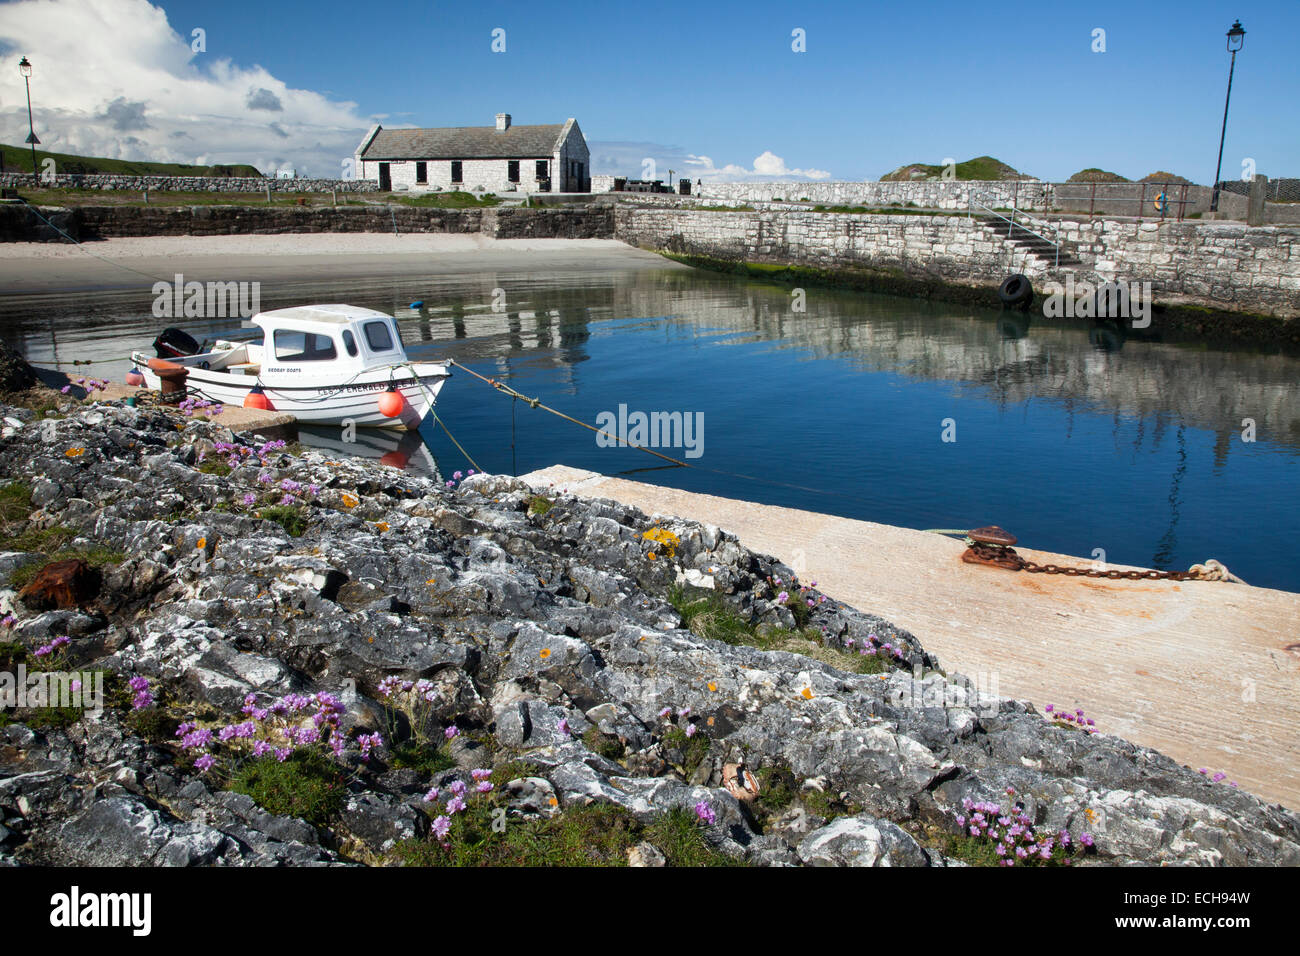 Fishing boat in Ballintoy Harbour, Causeway Coast, County Antrim, Northern Ireland. Stock Photo